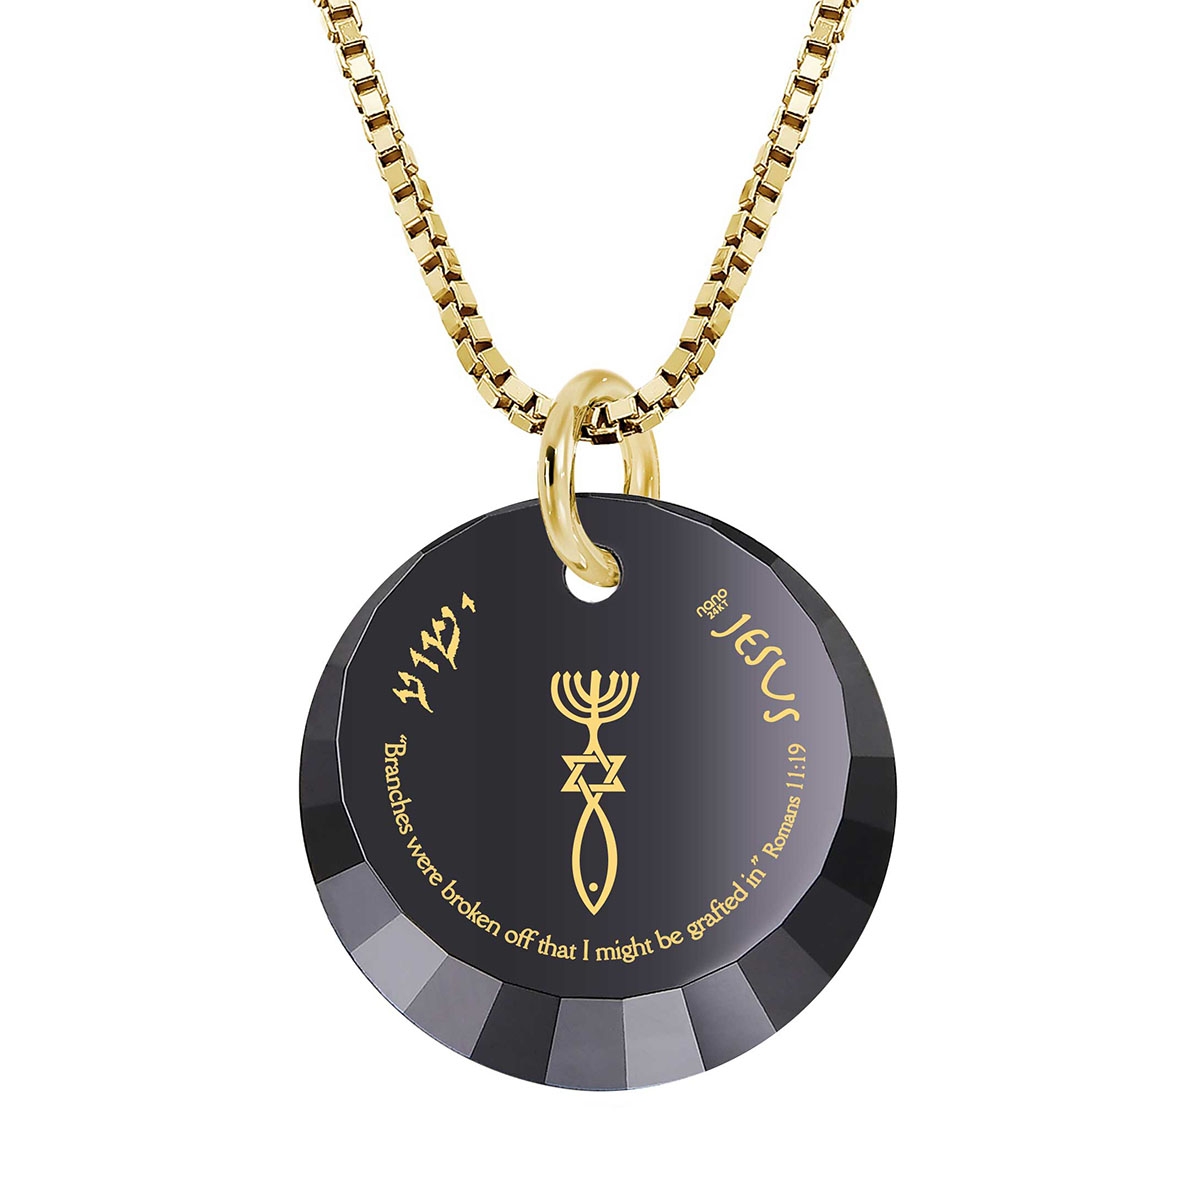 Nano Jewelry 24k Gold Plated & Gemstone Grafted-In Necklace with 24k Gold Micro-Inscription (Black) - 1